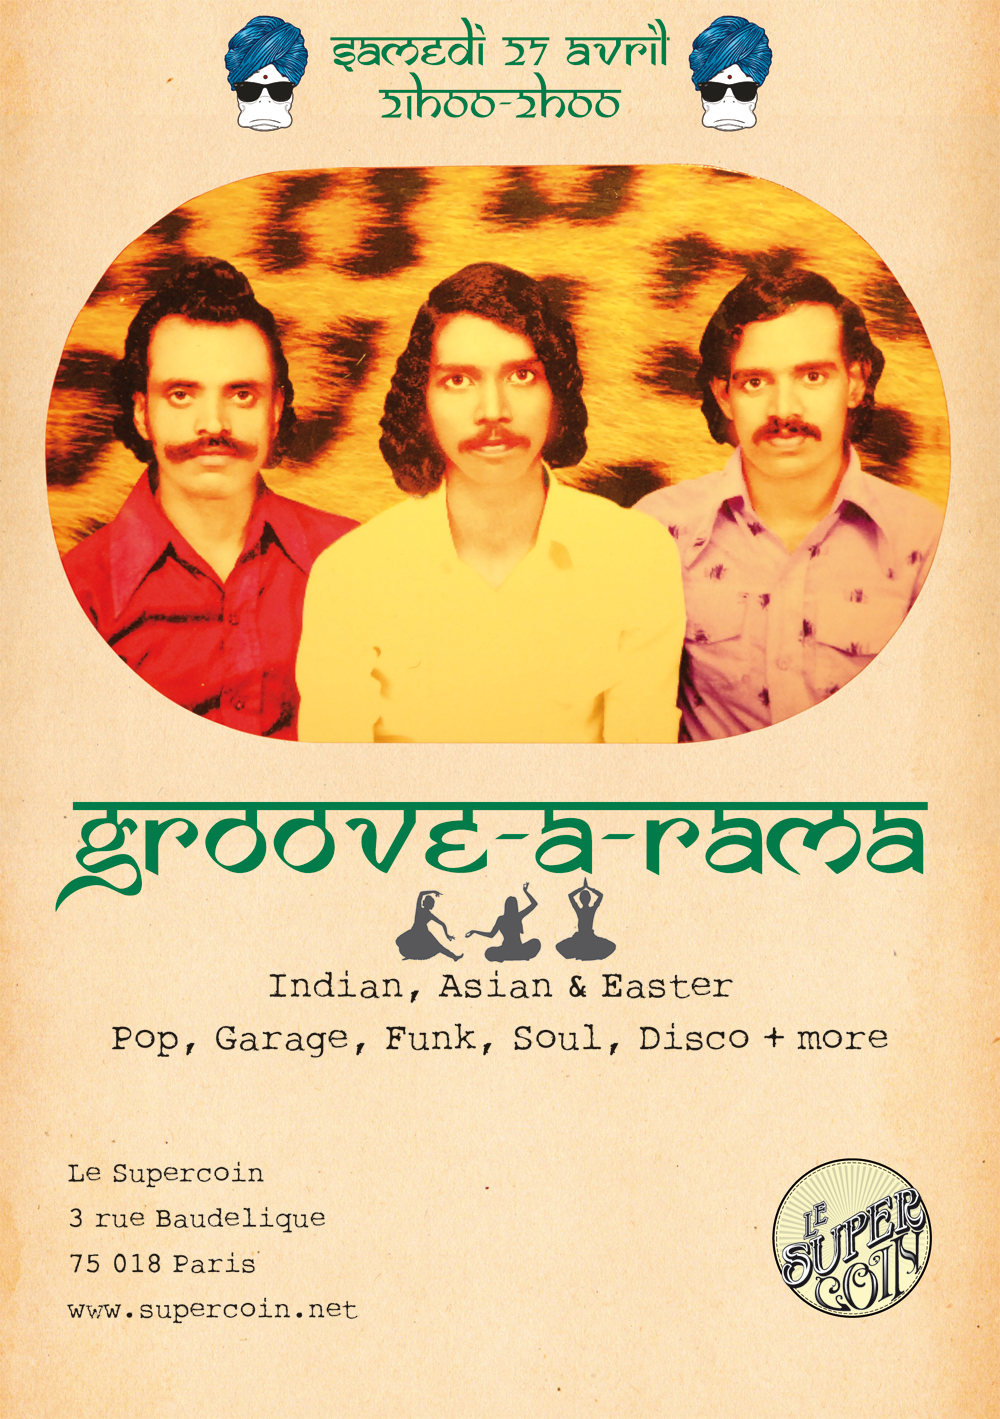 You are currently viewing Groove-A-Rama – SAM 27/04